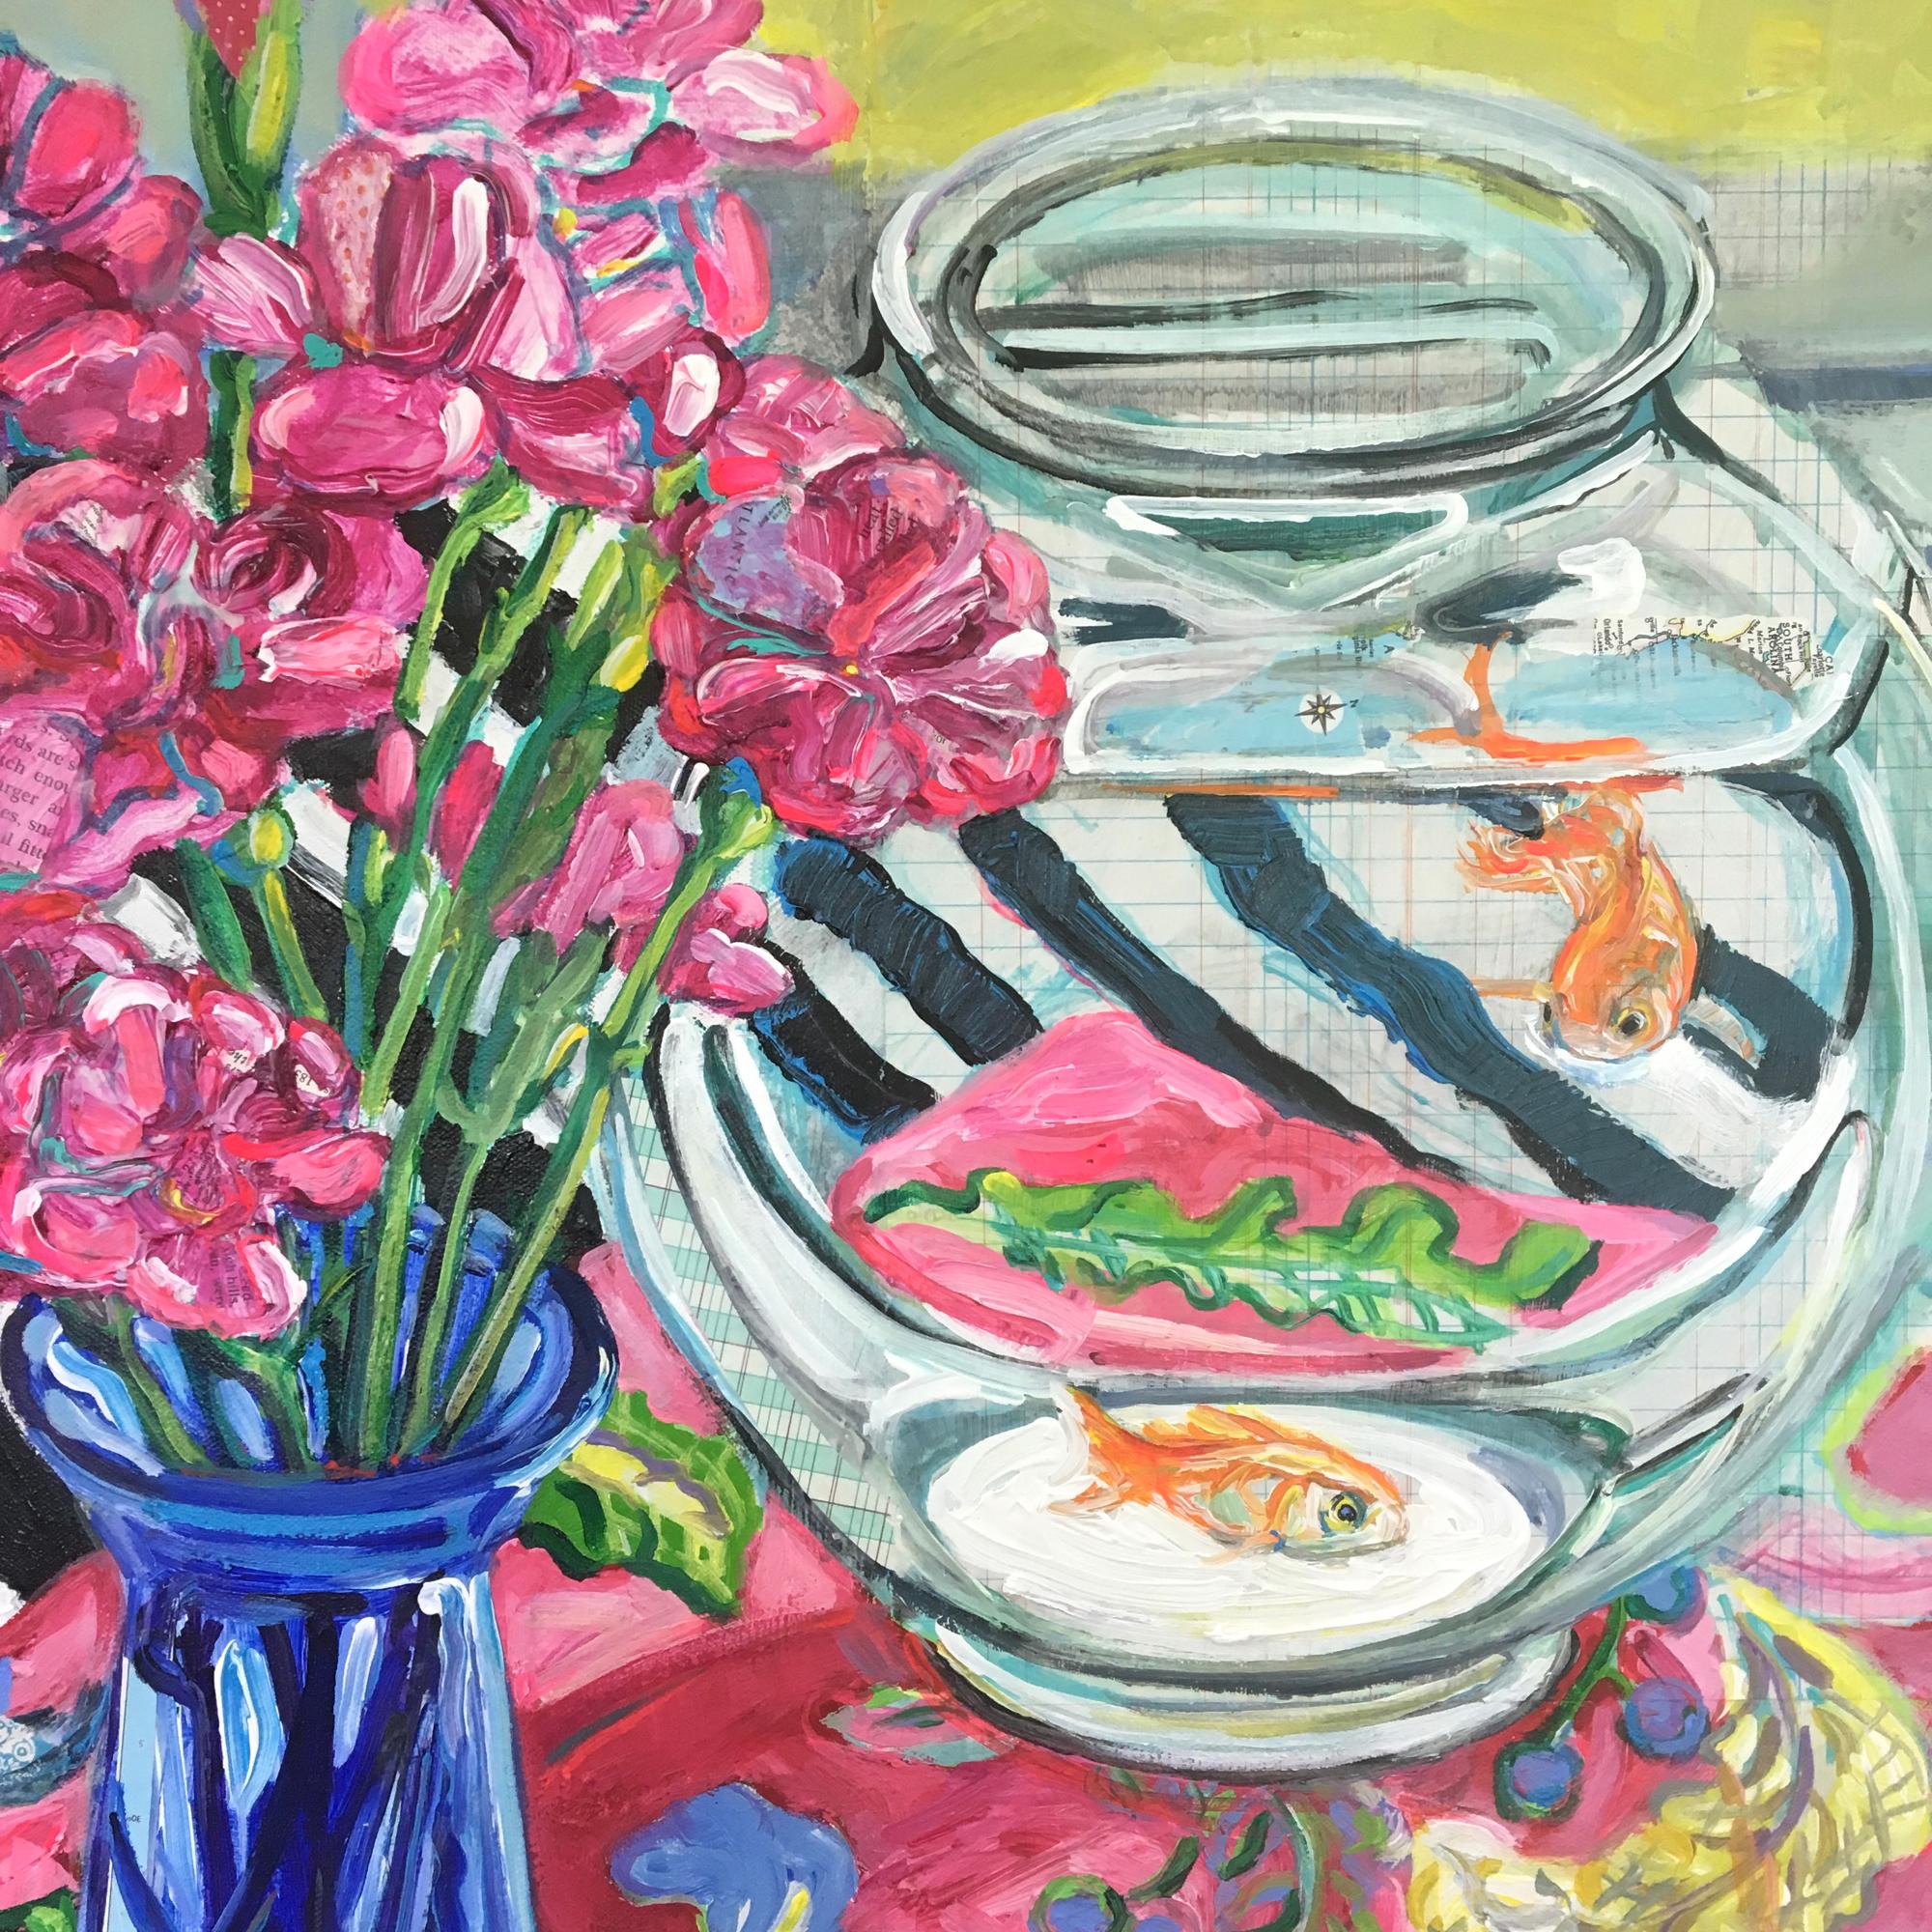 <p>Artist Comments<br>A bouquet of humble carnations seems to last forever. In contrast, goldfish can be short-lived, which artist Polly Jones experienced first hand. This still life is a vibrant musing on life and the time we are given to enjoy